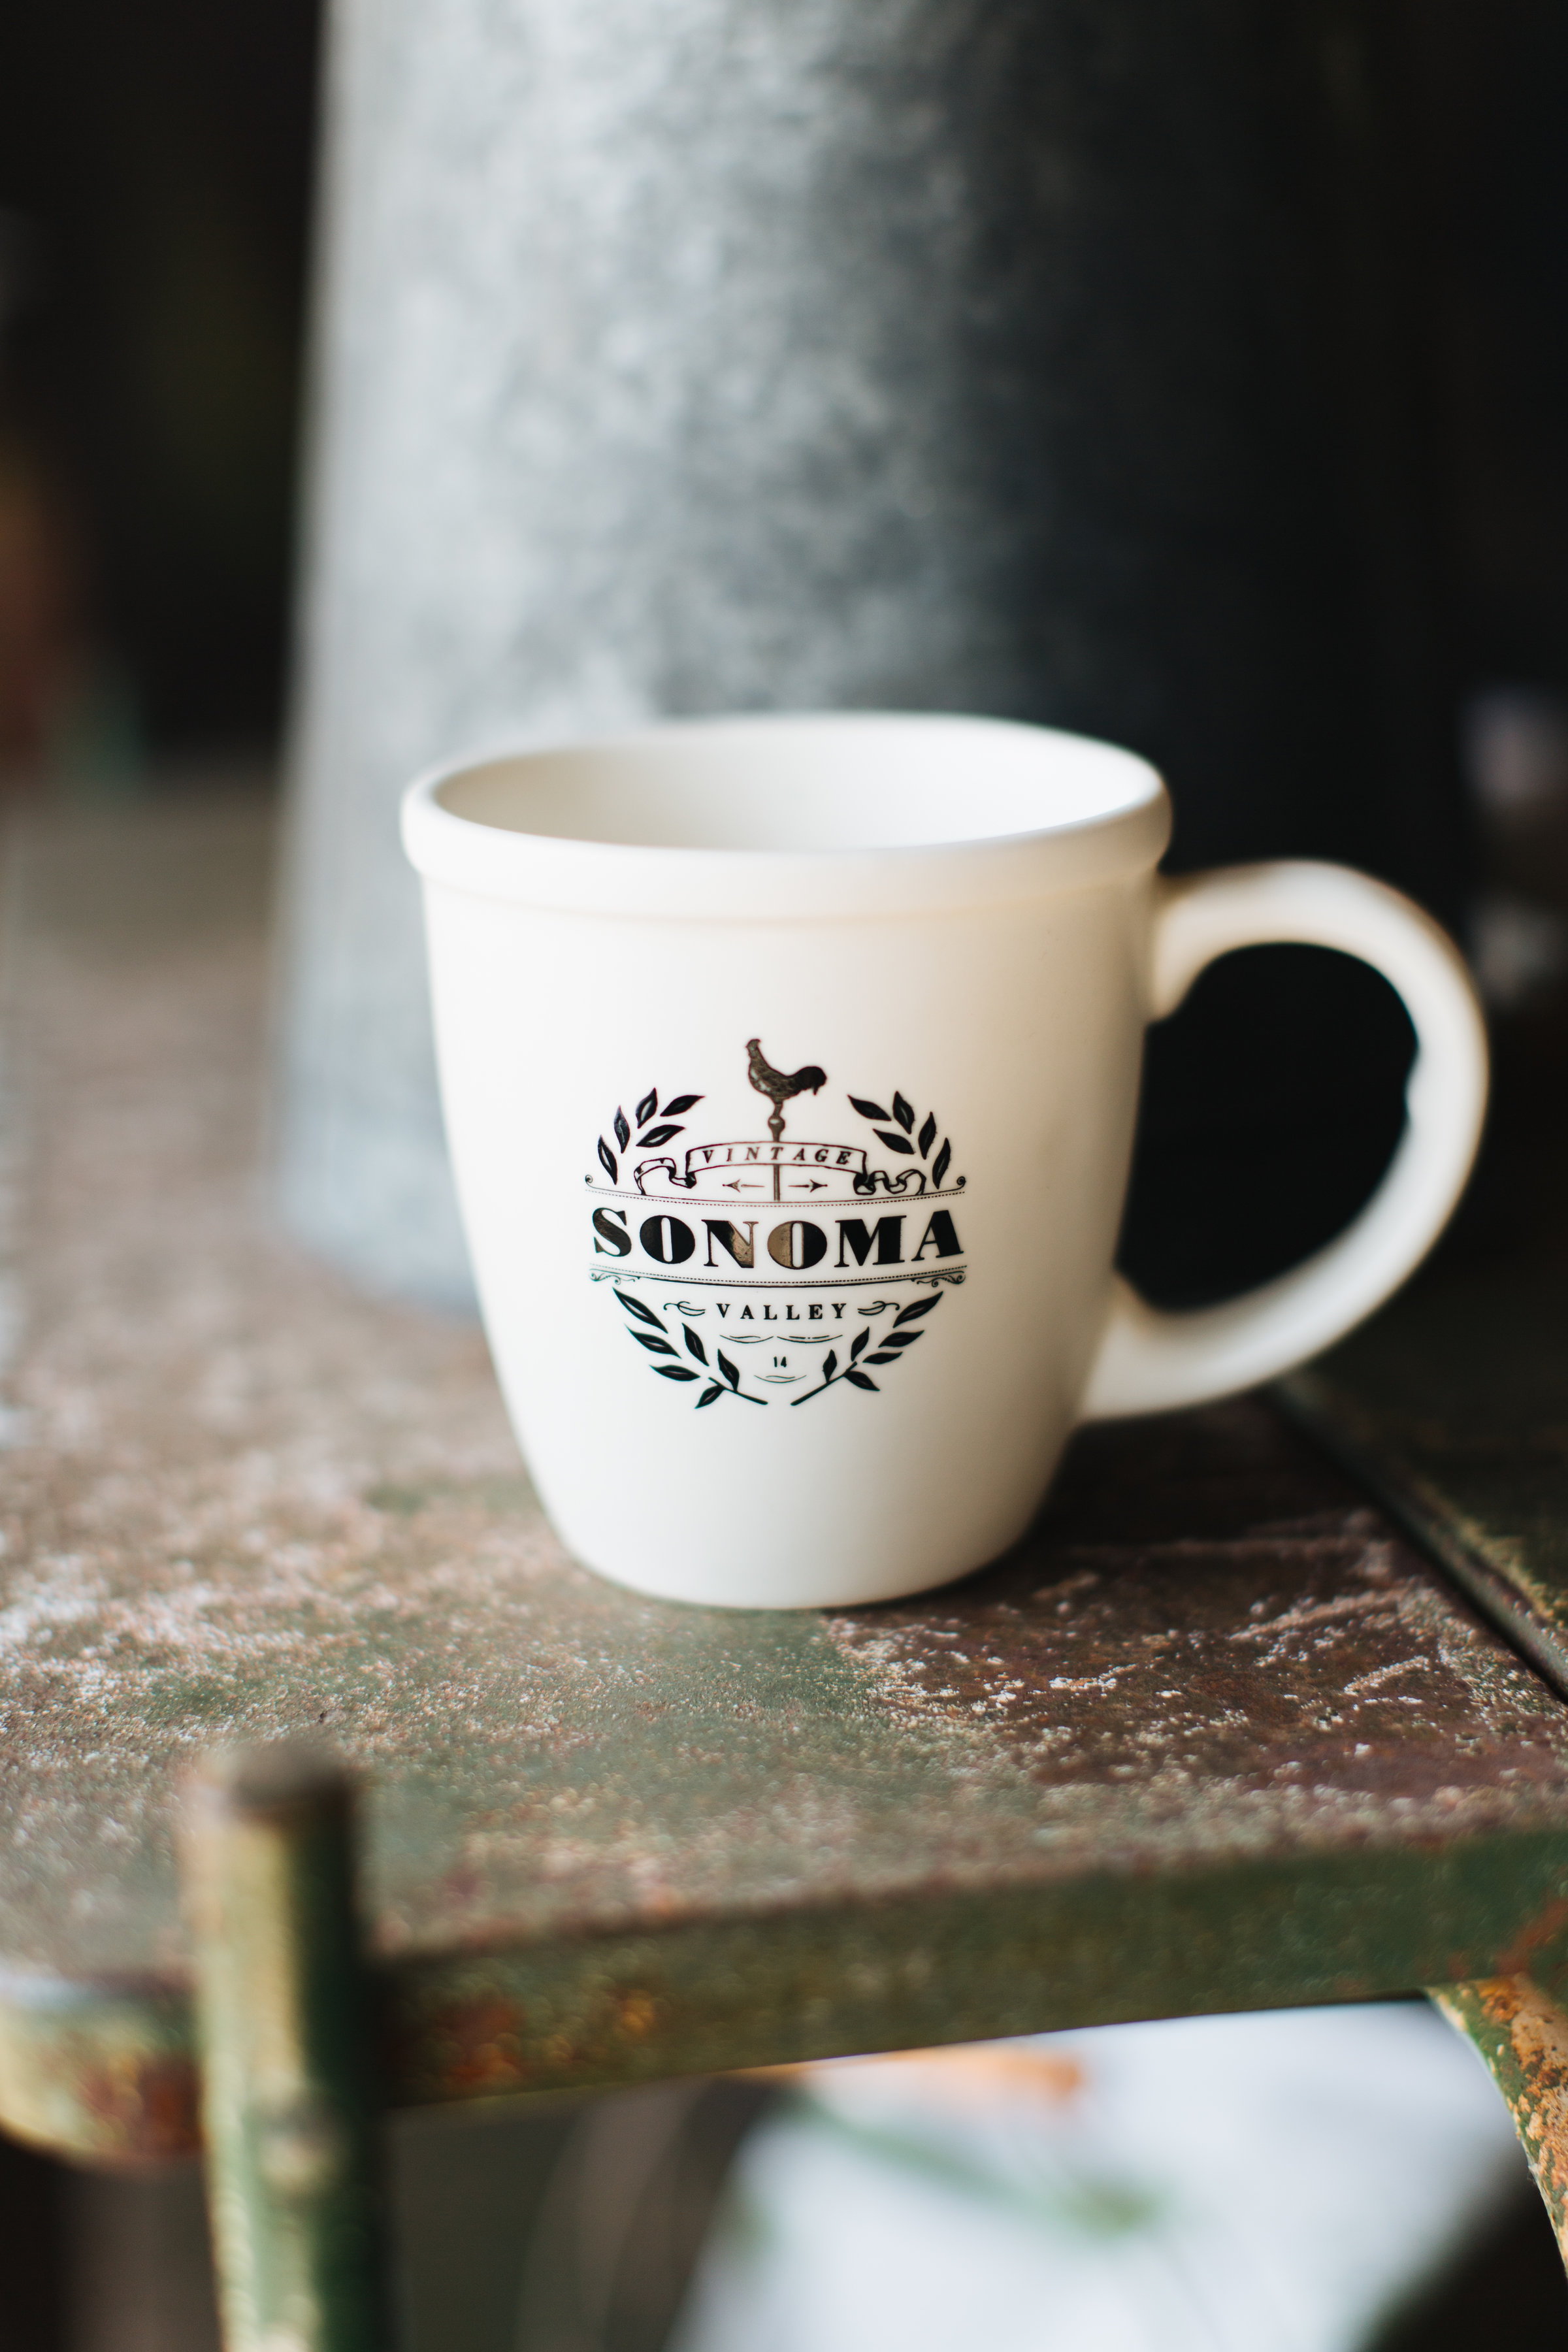 Sonoma Mug to Benefit Victims of The North Bay Fires | chateausonoma.com